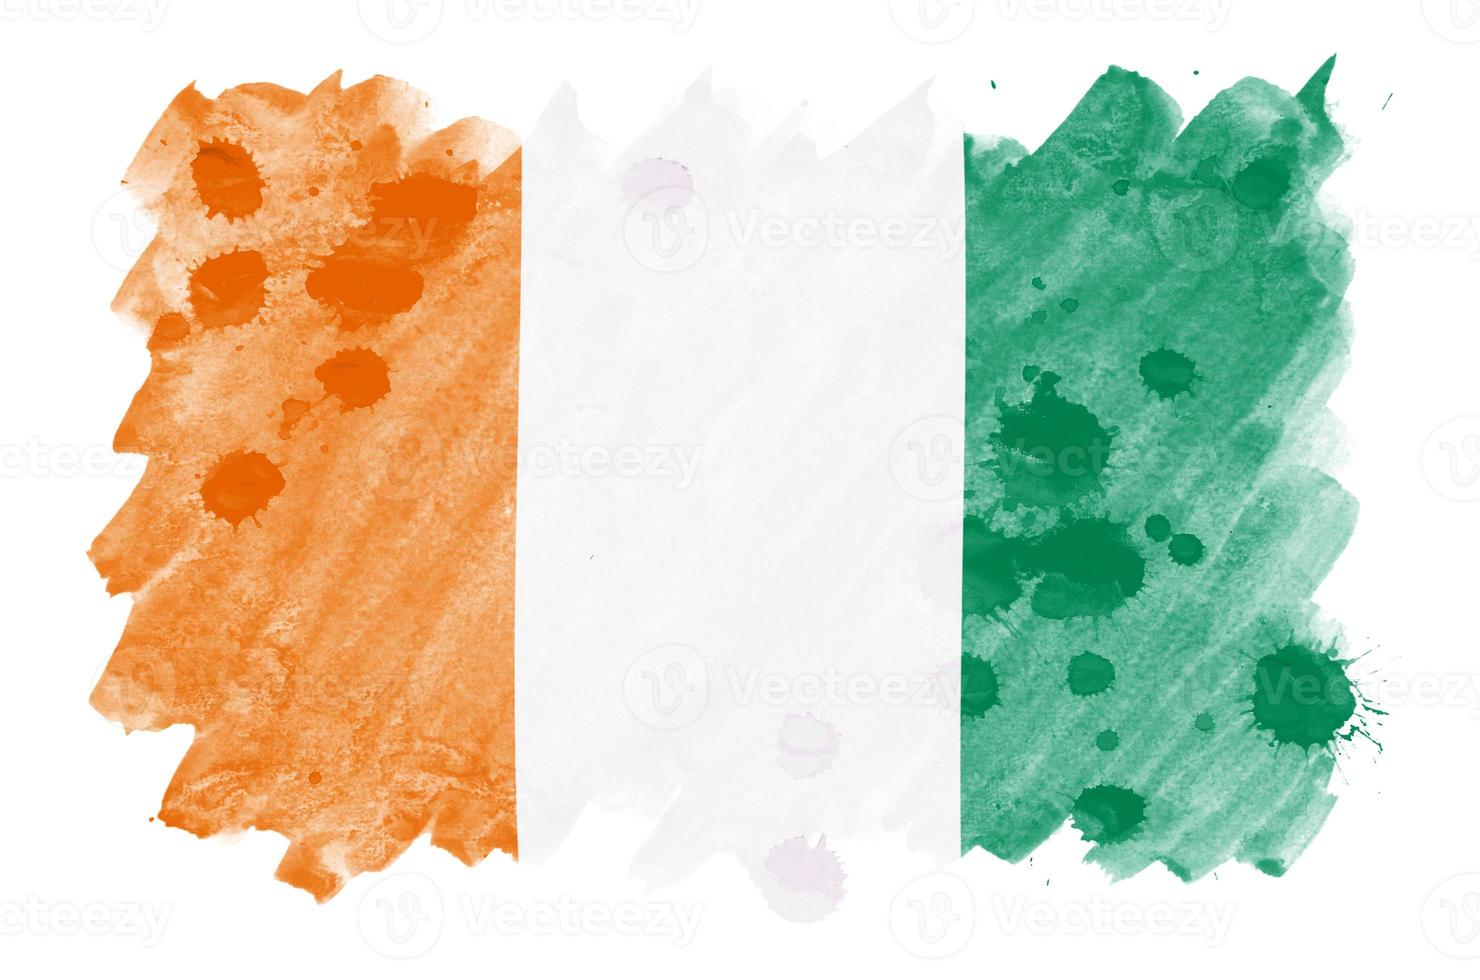 Ivory Coast flag  is depicted in liquid watercolor style isolated on white background photo